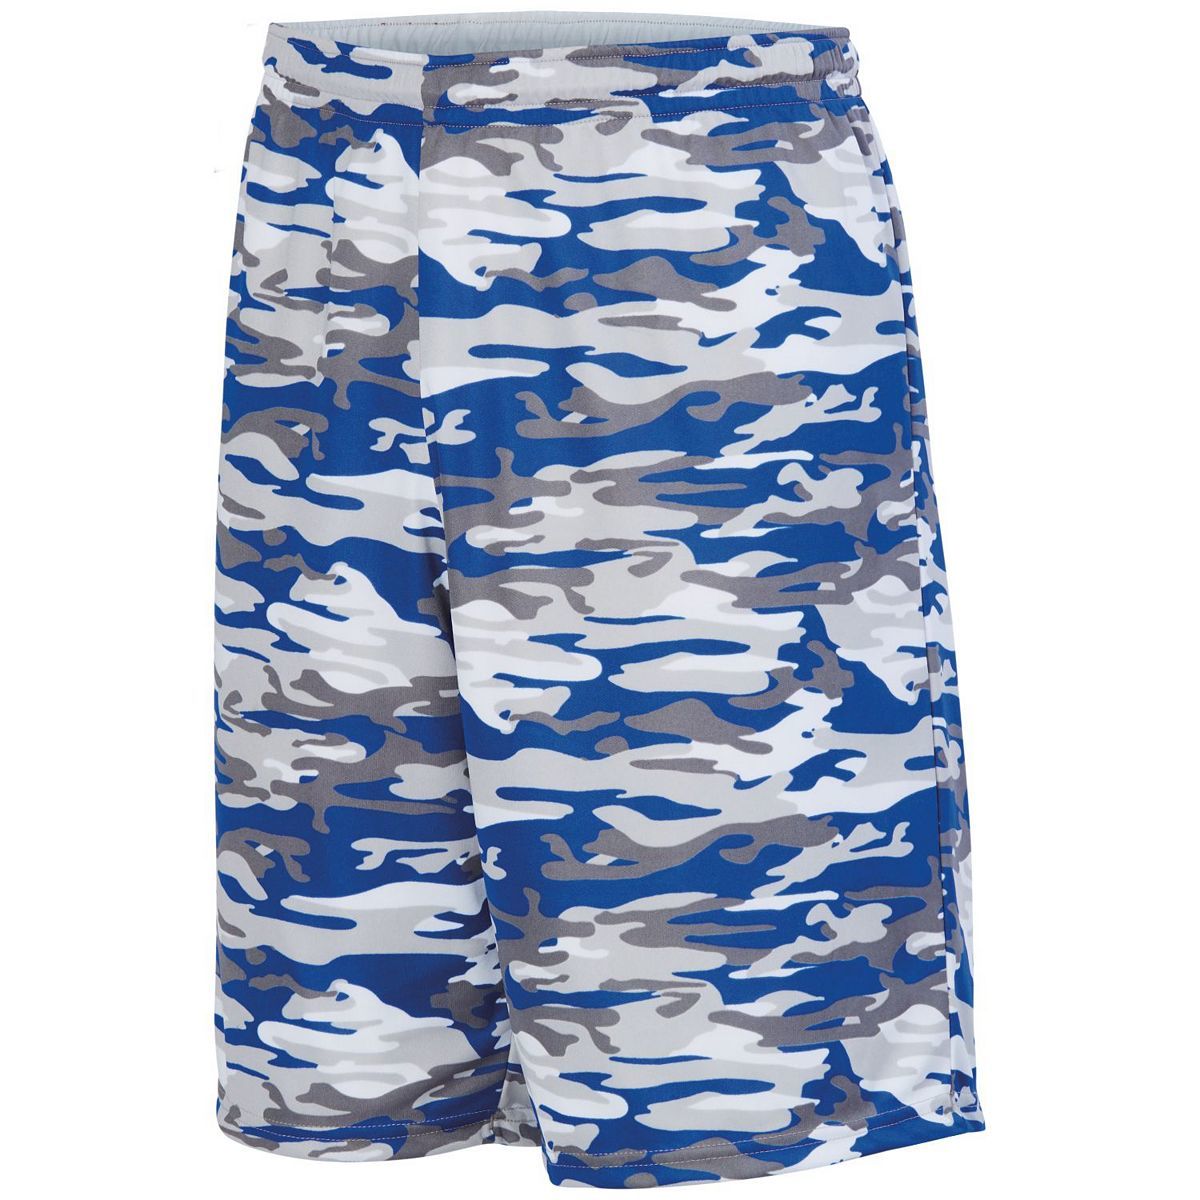 Augusta Sportswear Reversible Wicking Shorts in Royal Mod/White  -Part of the Adult, Adult-Shorts, Augusta-Products, Basketball, All-Sports, All-Sports-1 product lines at KanaleyCreations.com